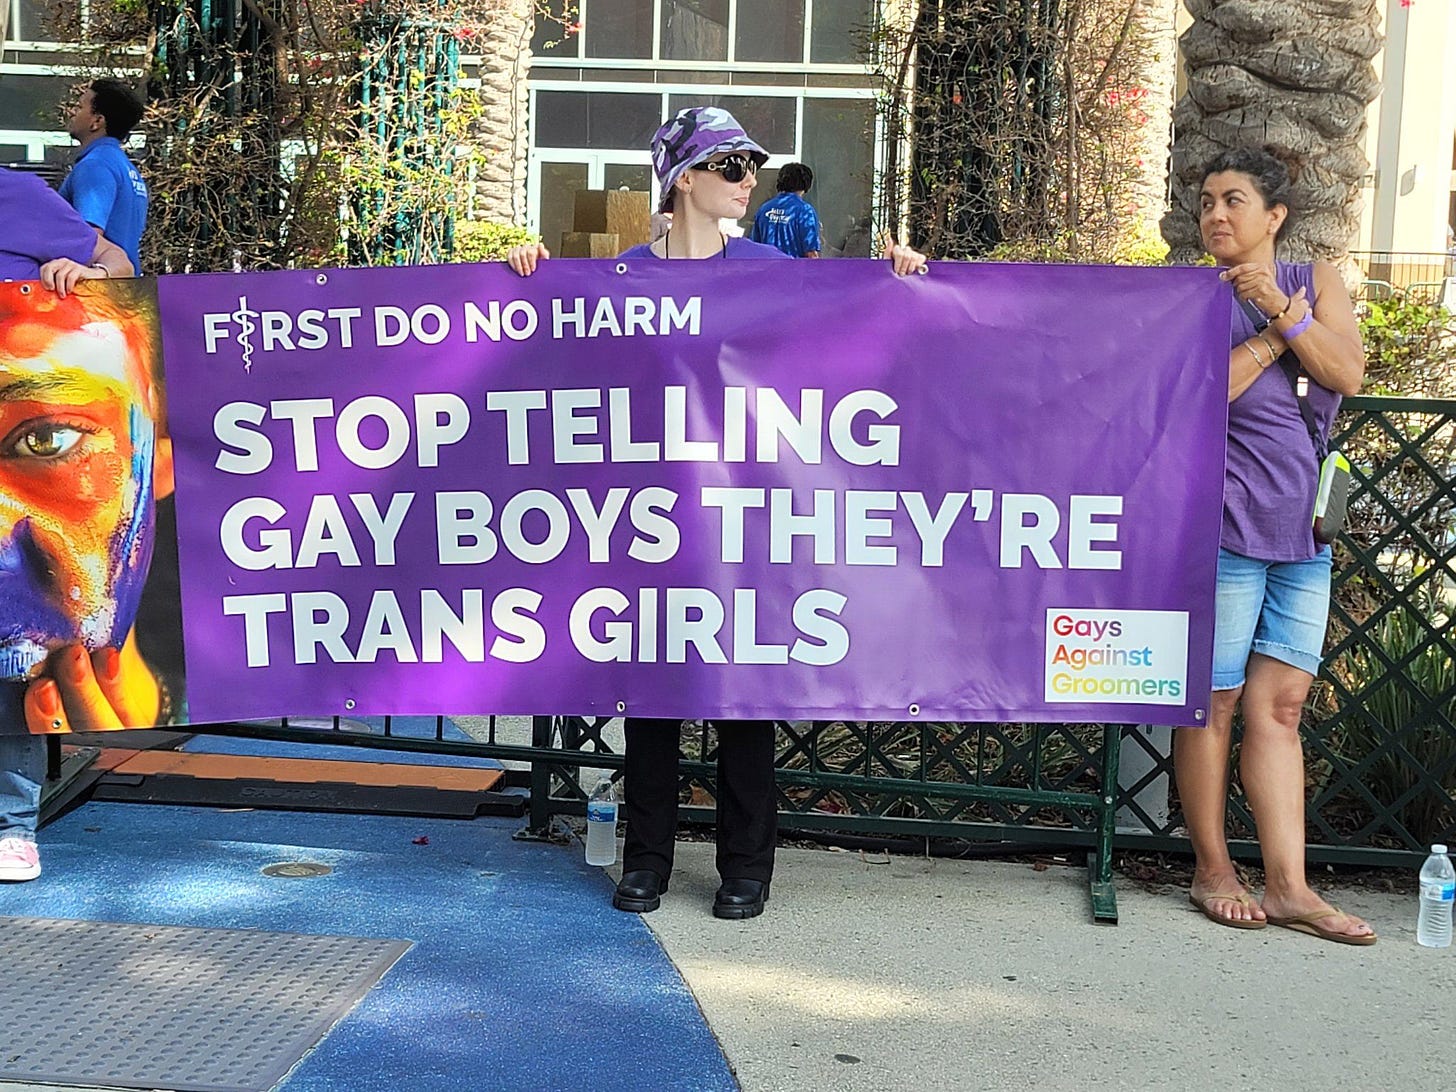 May be an image of 4 people, people standing, outdoors and text that says 'F$RST DO NO HARM STOP TELLING GAY BOYS THEY'RE TRANS GIRLS Gays Against Groomers'